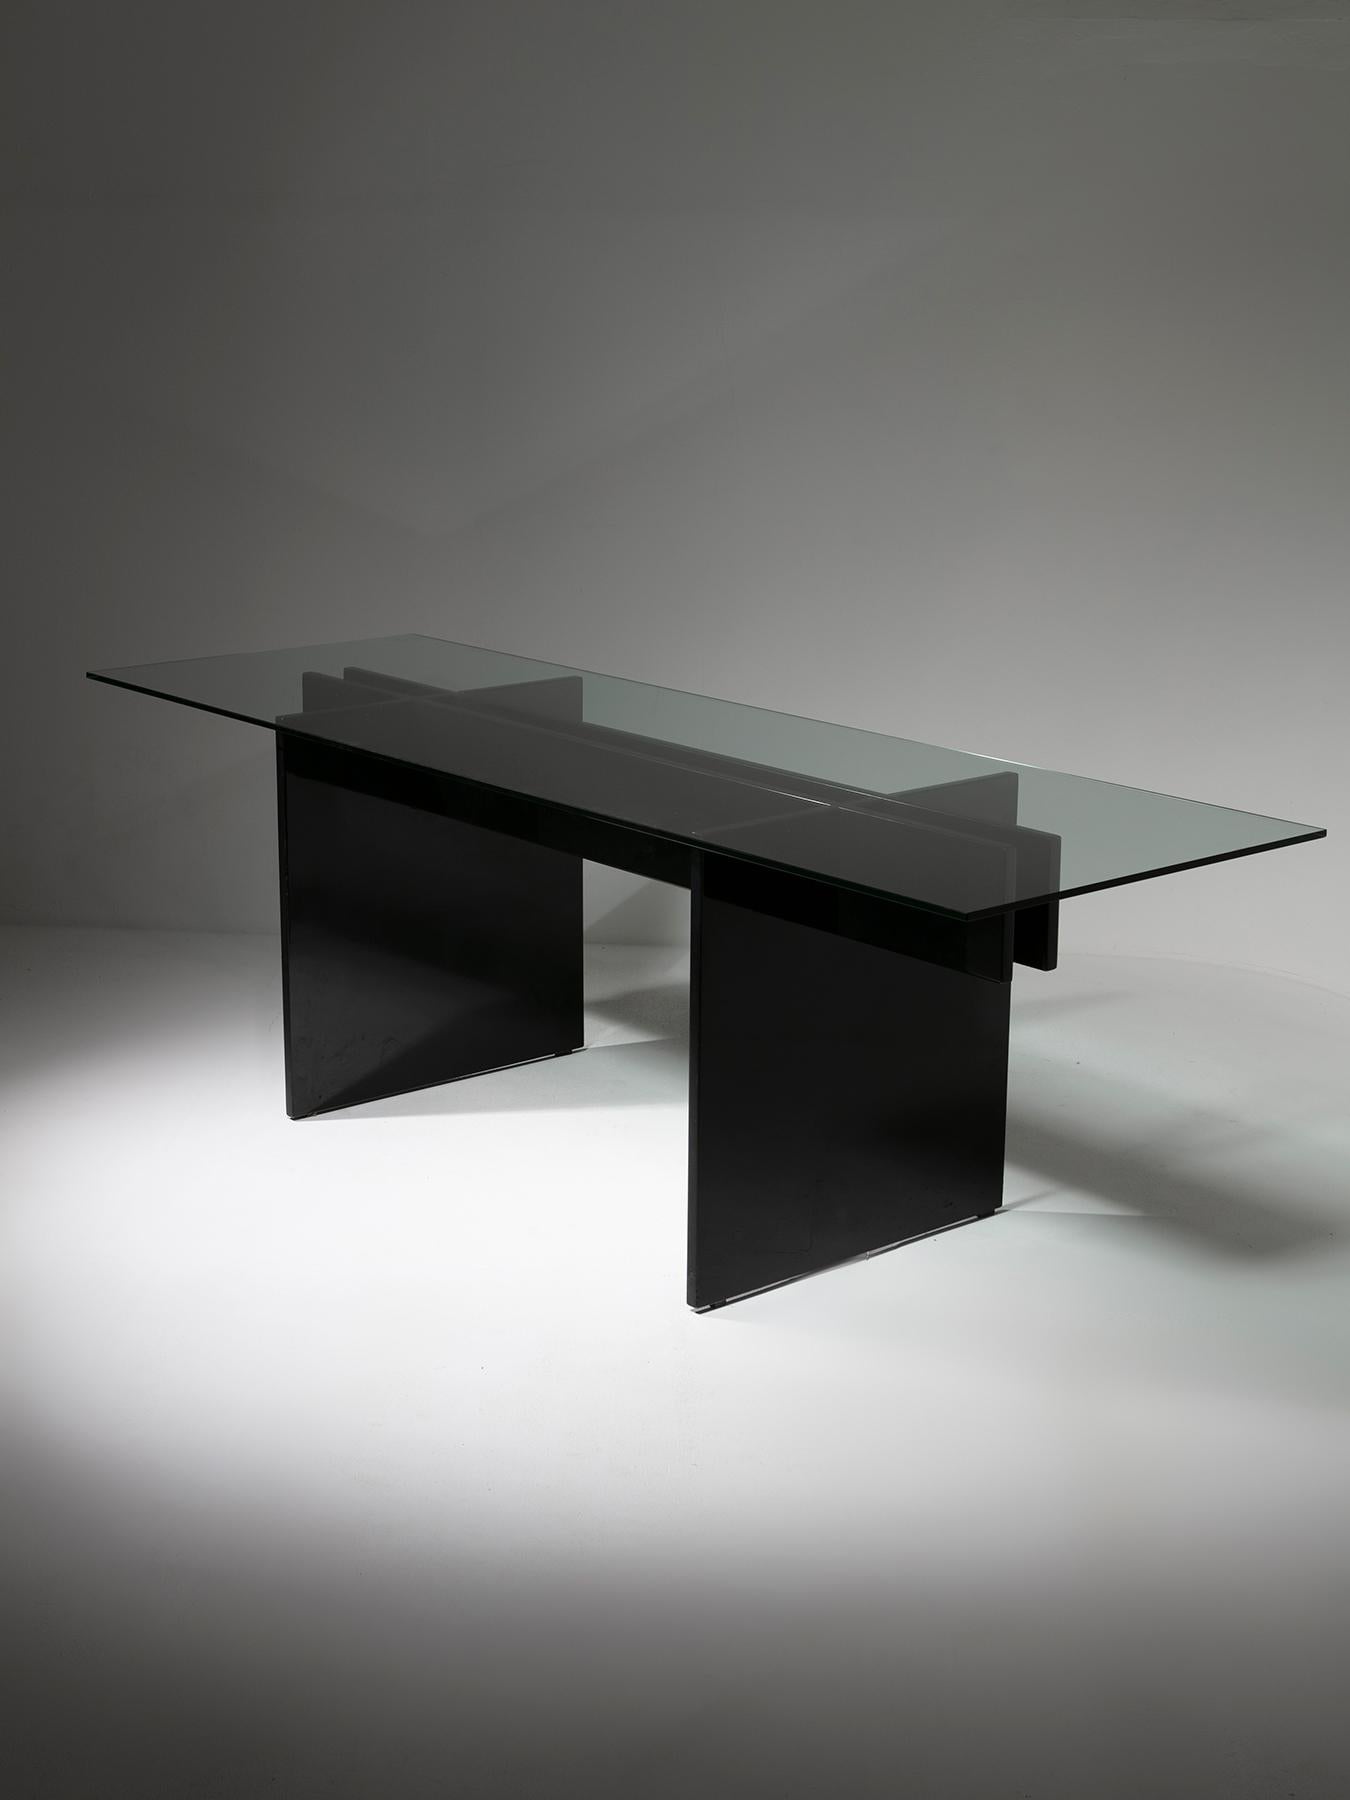 Large table by Studio Tetrach for Bazzani.
Black lacquered straight frame supports a thick crystal top.